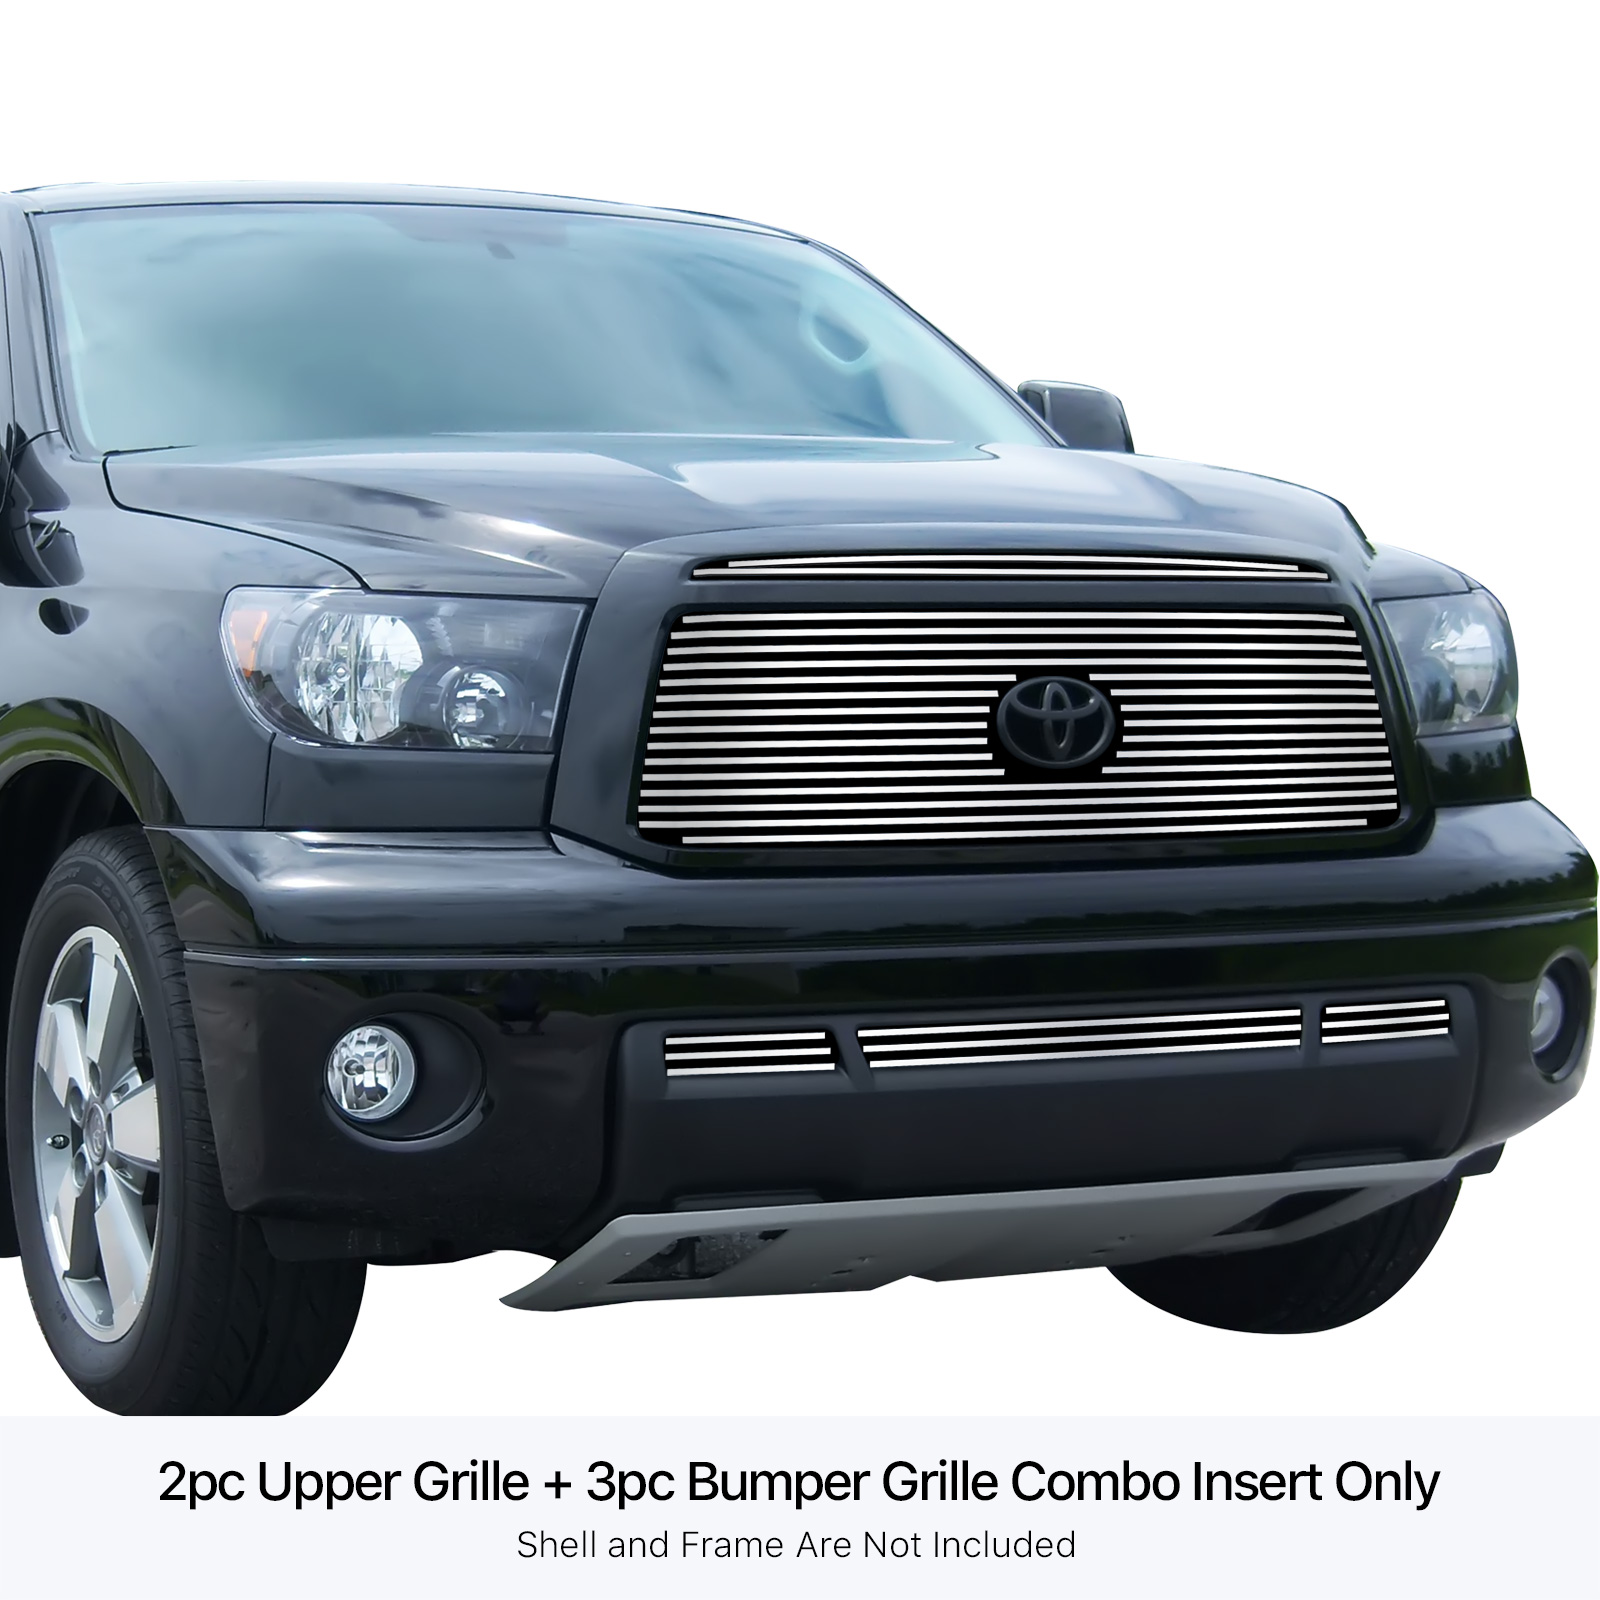 2010-2013 Toyota Tundra MAIN UPPER + LOWER BUMPER Stainless Steel Billet Grille